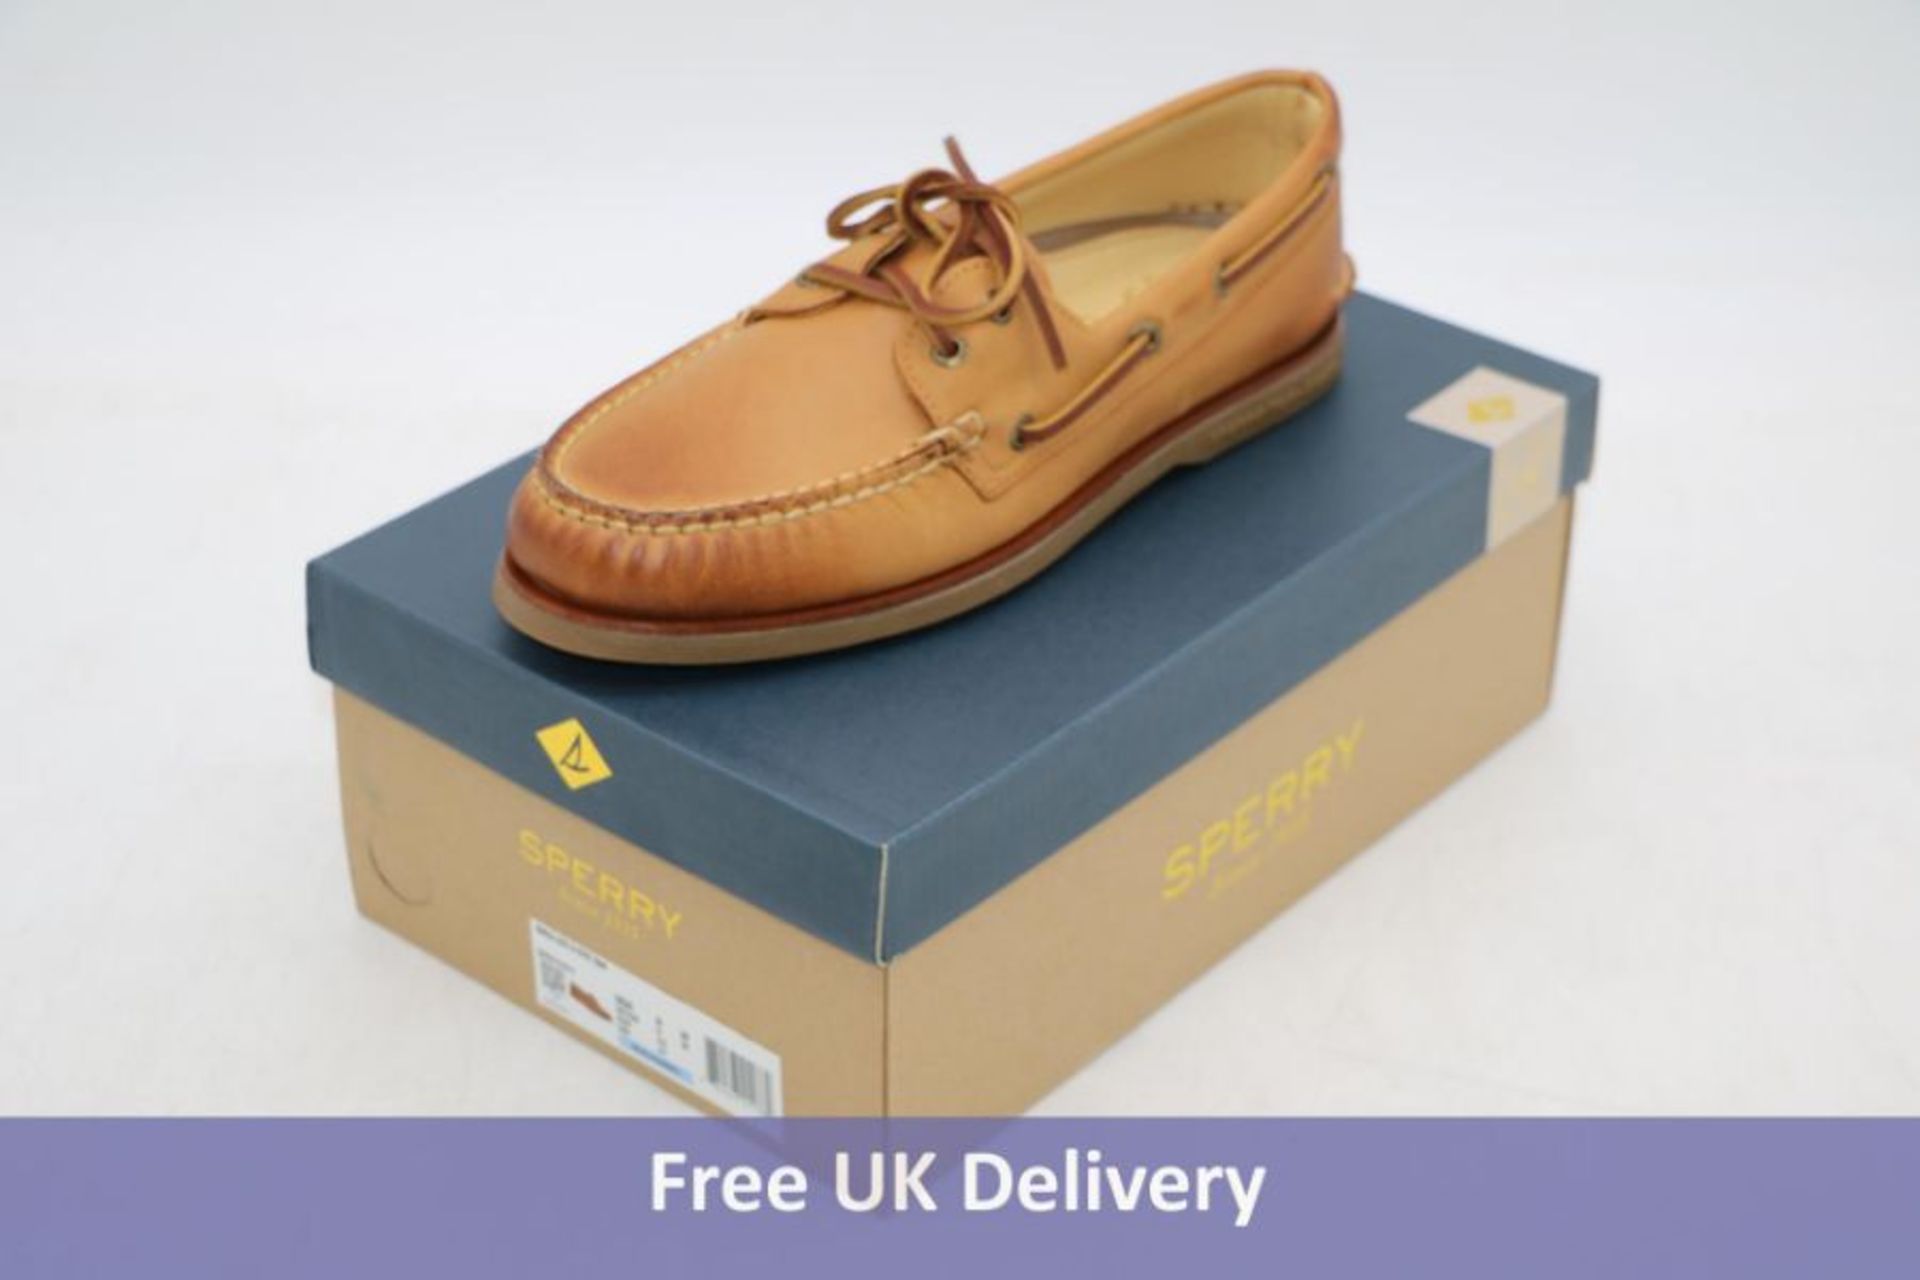 Sperry Men's Authentic Boat Shoe Gold Cup, UK 8